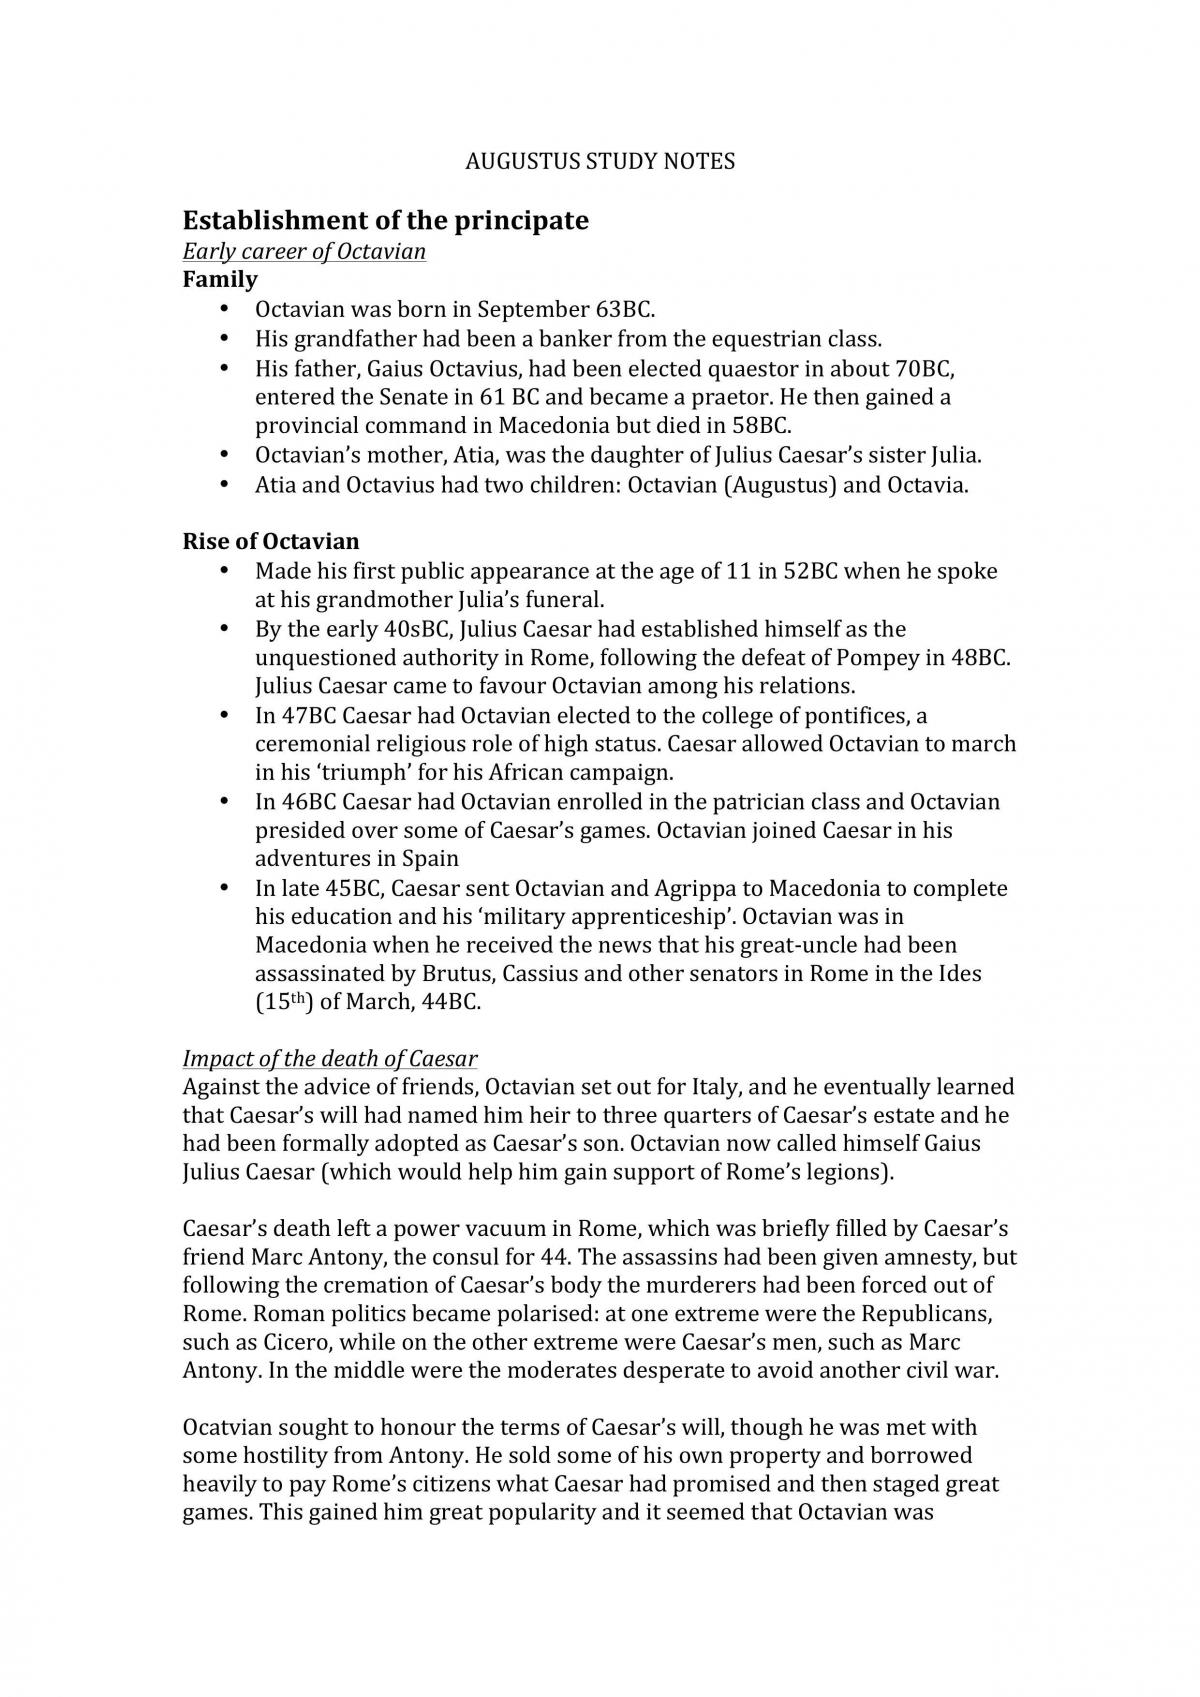 Augustan Age - Band 6 Summary Notes - Page 1